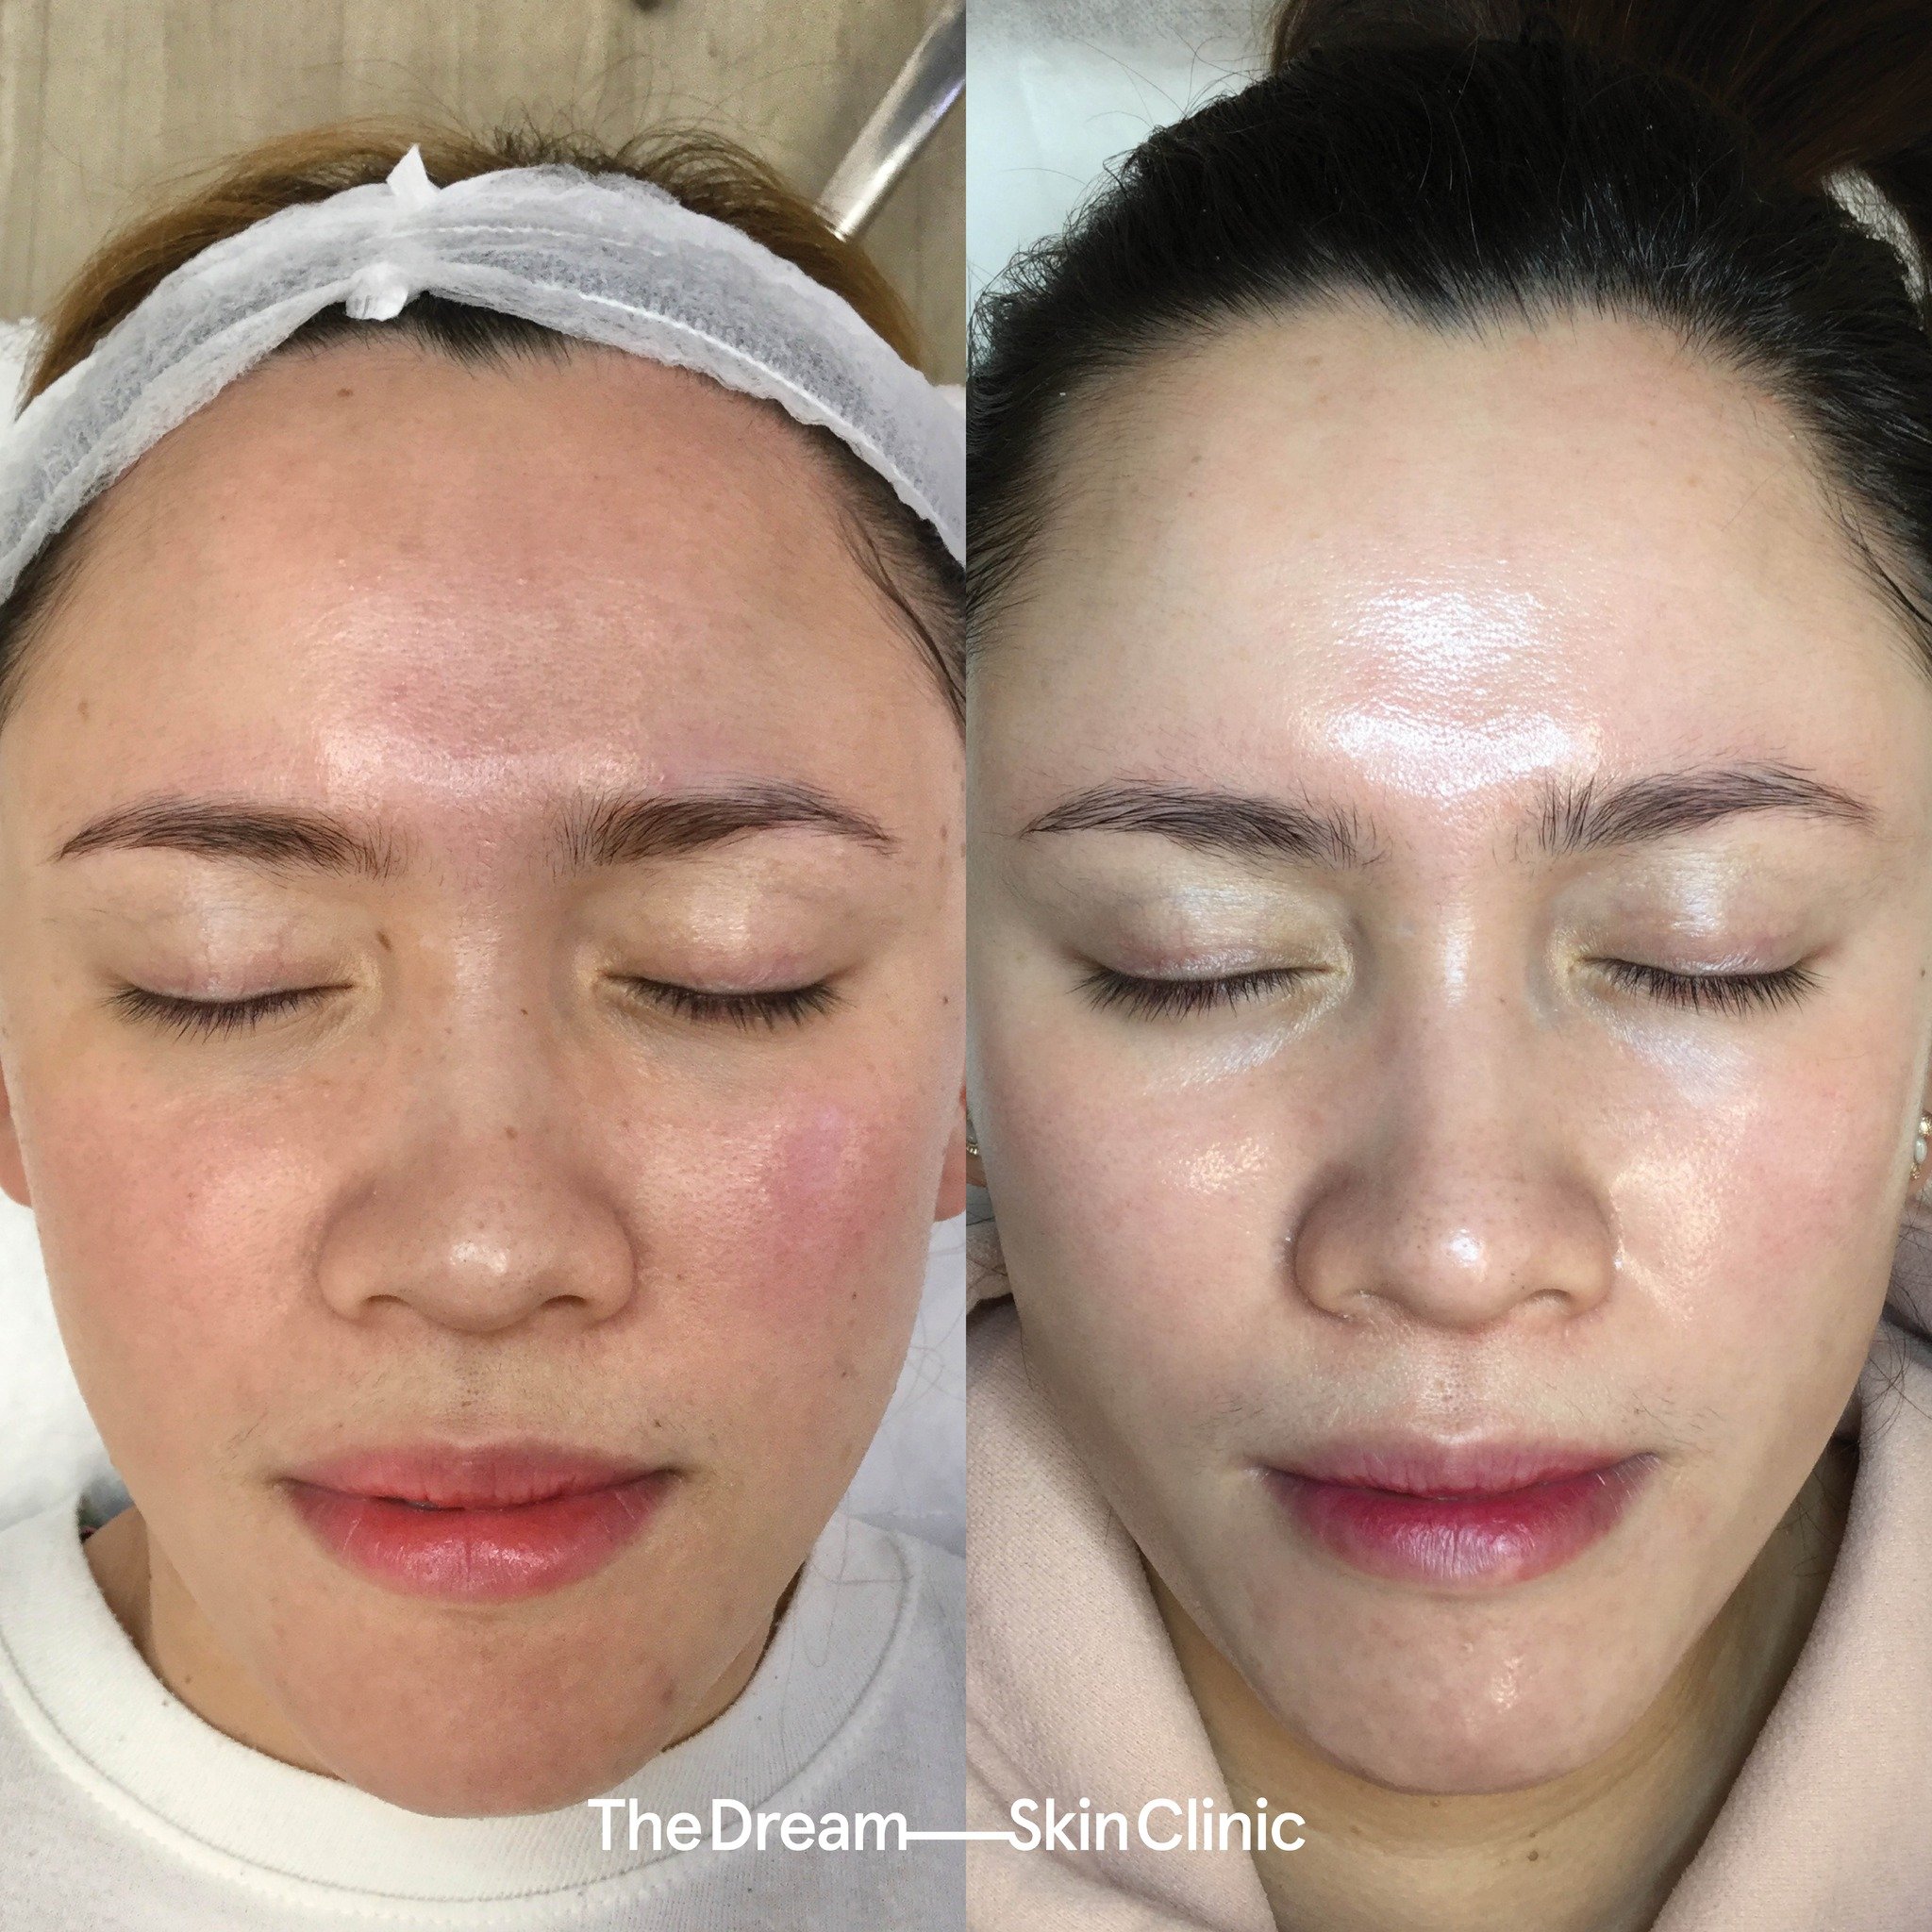 This client&rsquo;s concerns were:
∙ Texture
∙ Dull Skin
∙ Sensitivity

In achieving skin like this, the Dream Team plays a valuable role in helping you attain glass skin by providing professional guidance, personalised treatments, and access to adva